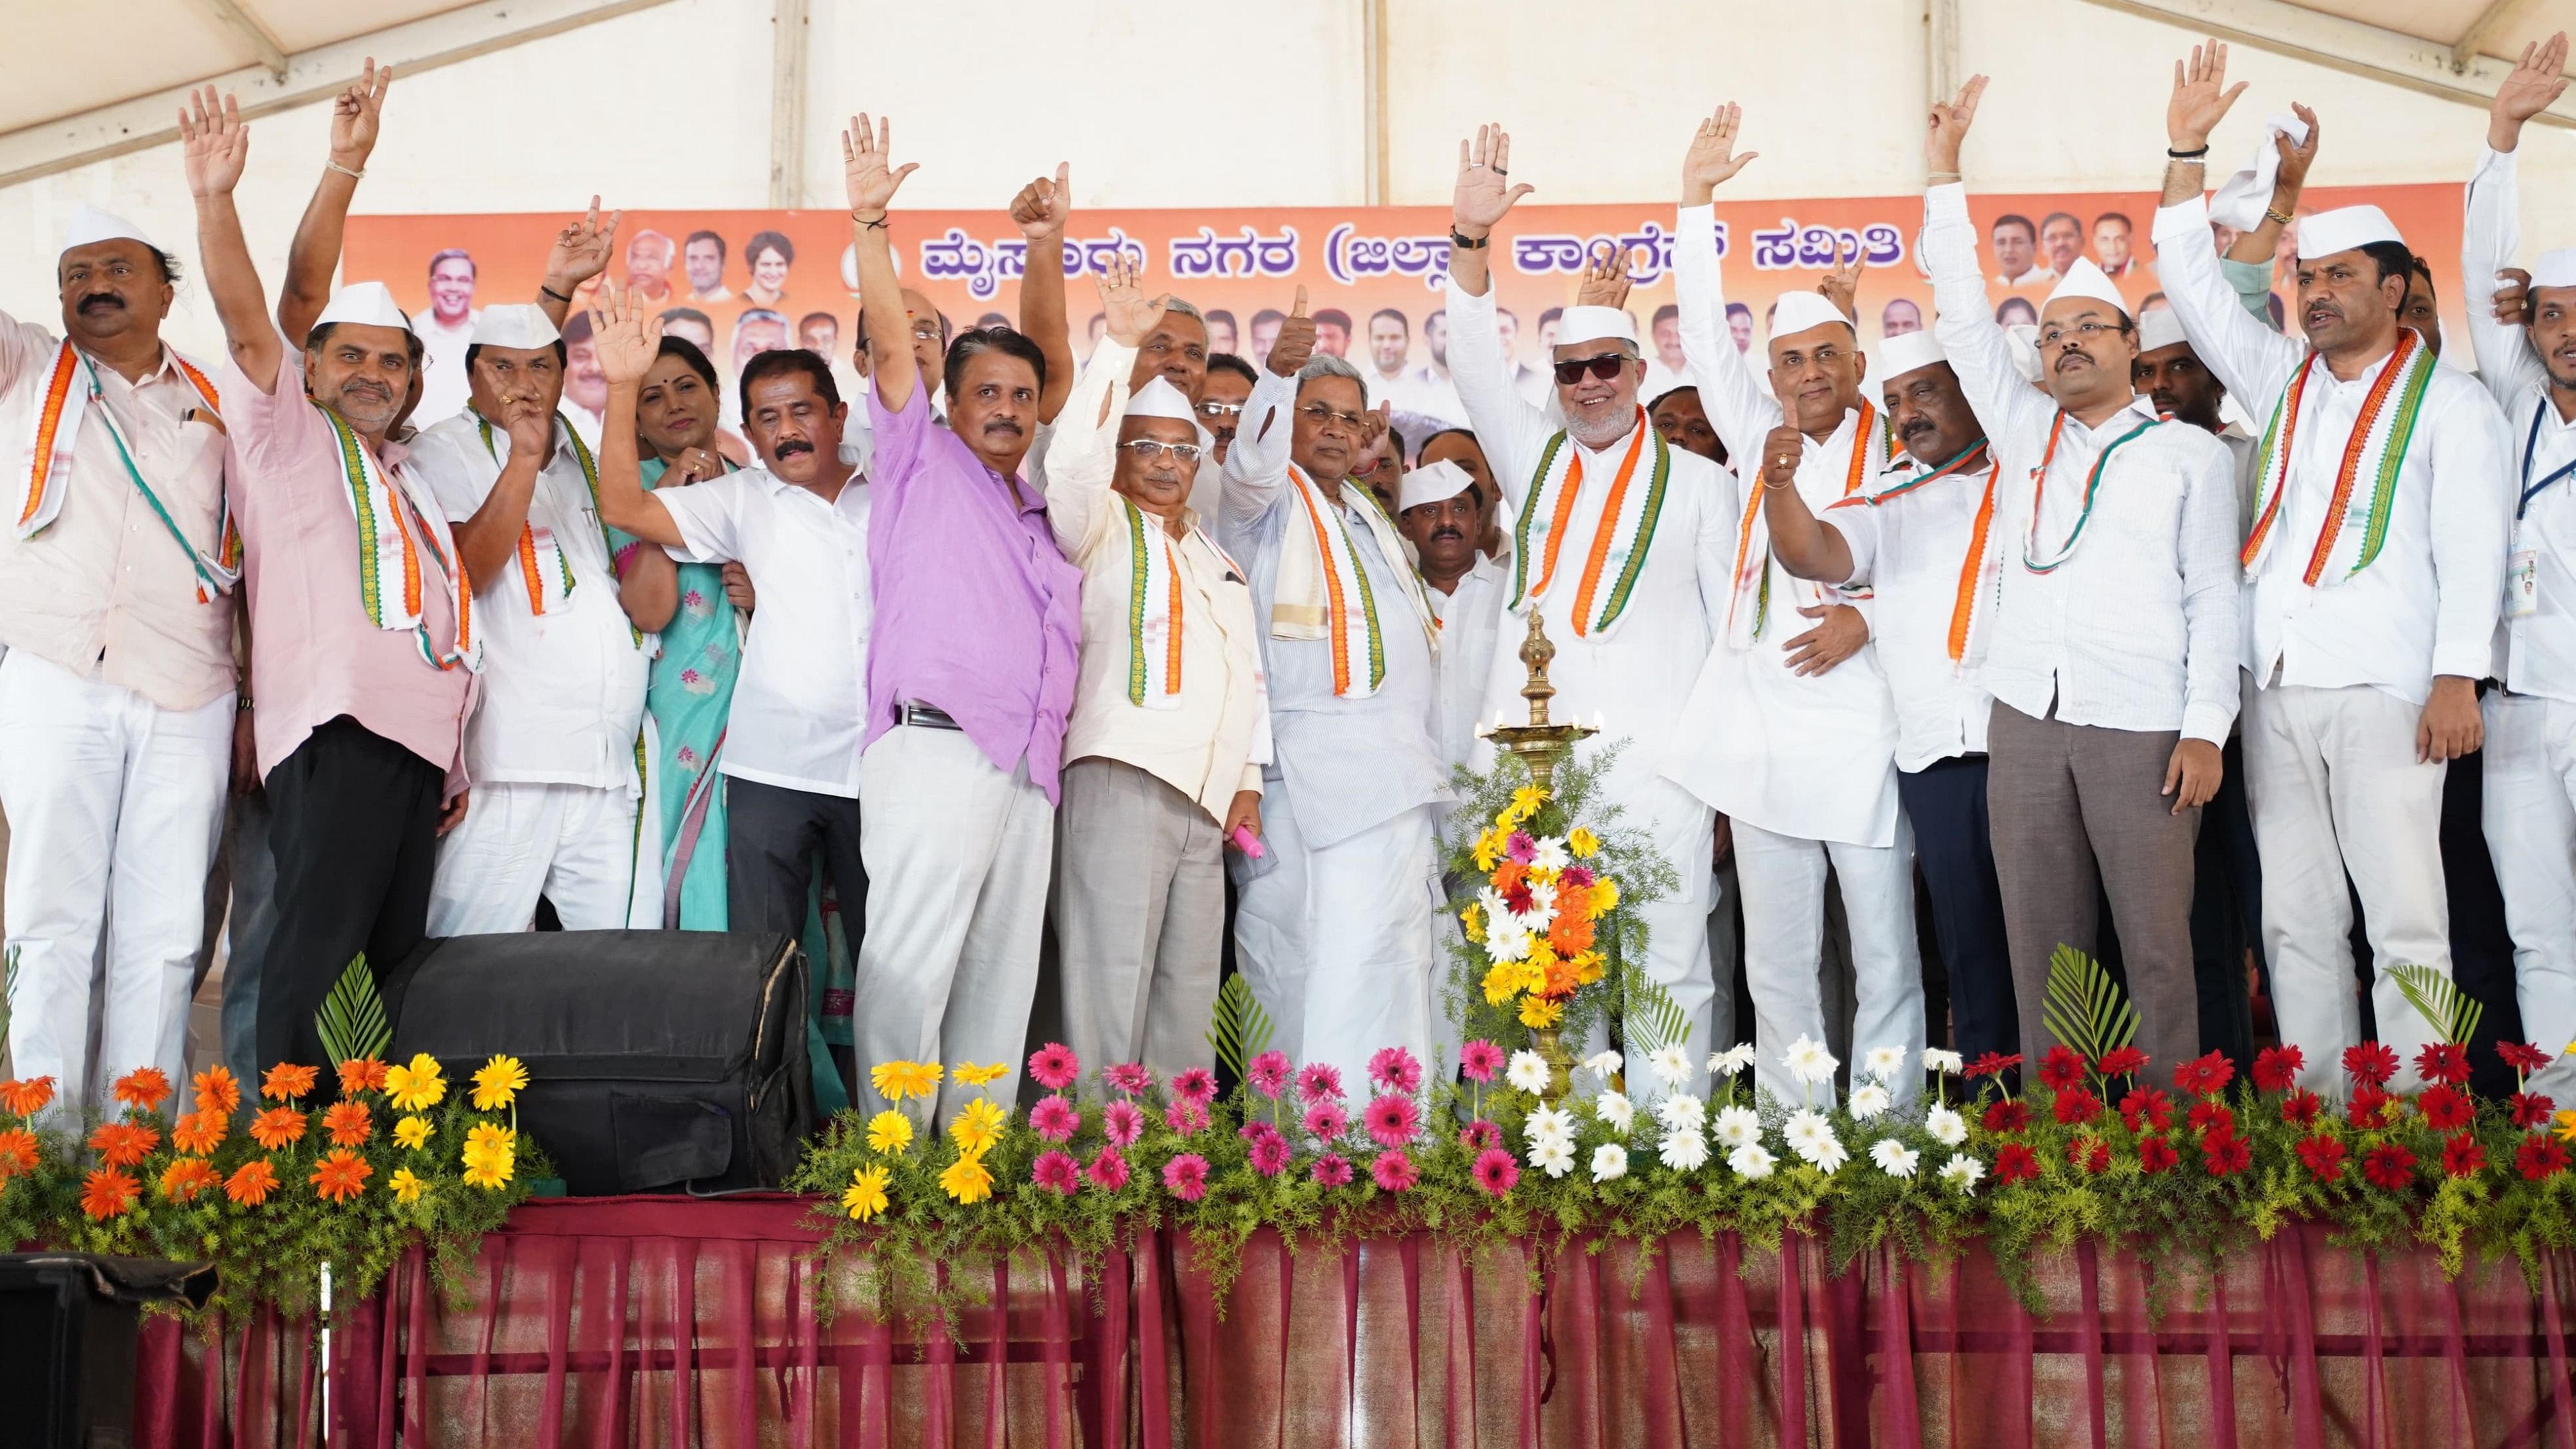 <div class="paragraphs"><p>Several BJP and JD(S) leaders joined the Congress, in the presence of Chief Minister Siddaramaiah, in Mysuru, on Wednesday, March 27.</p></div>